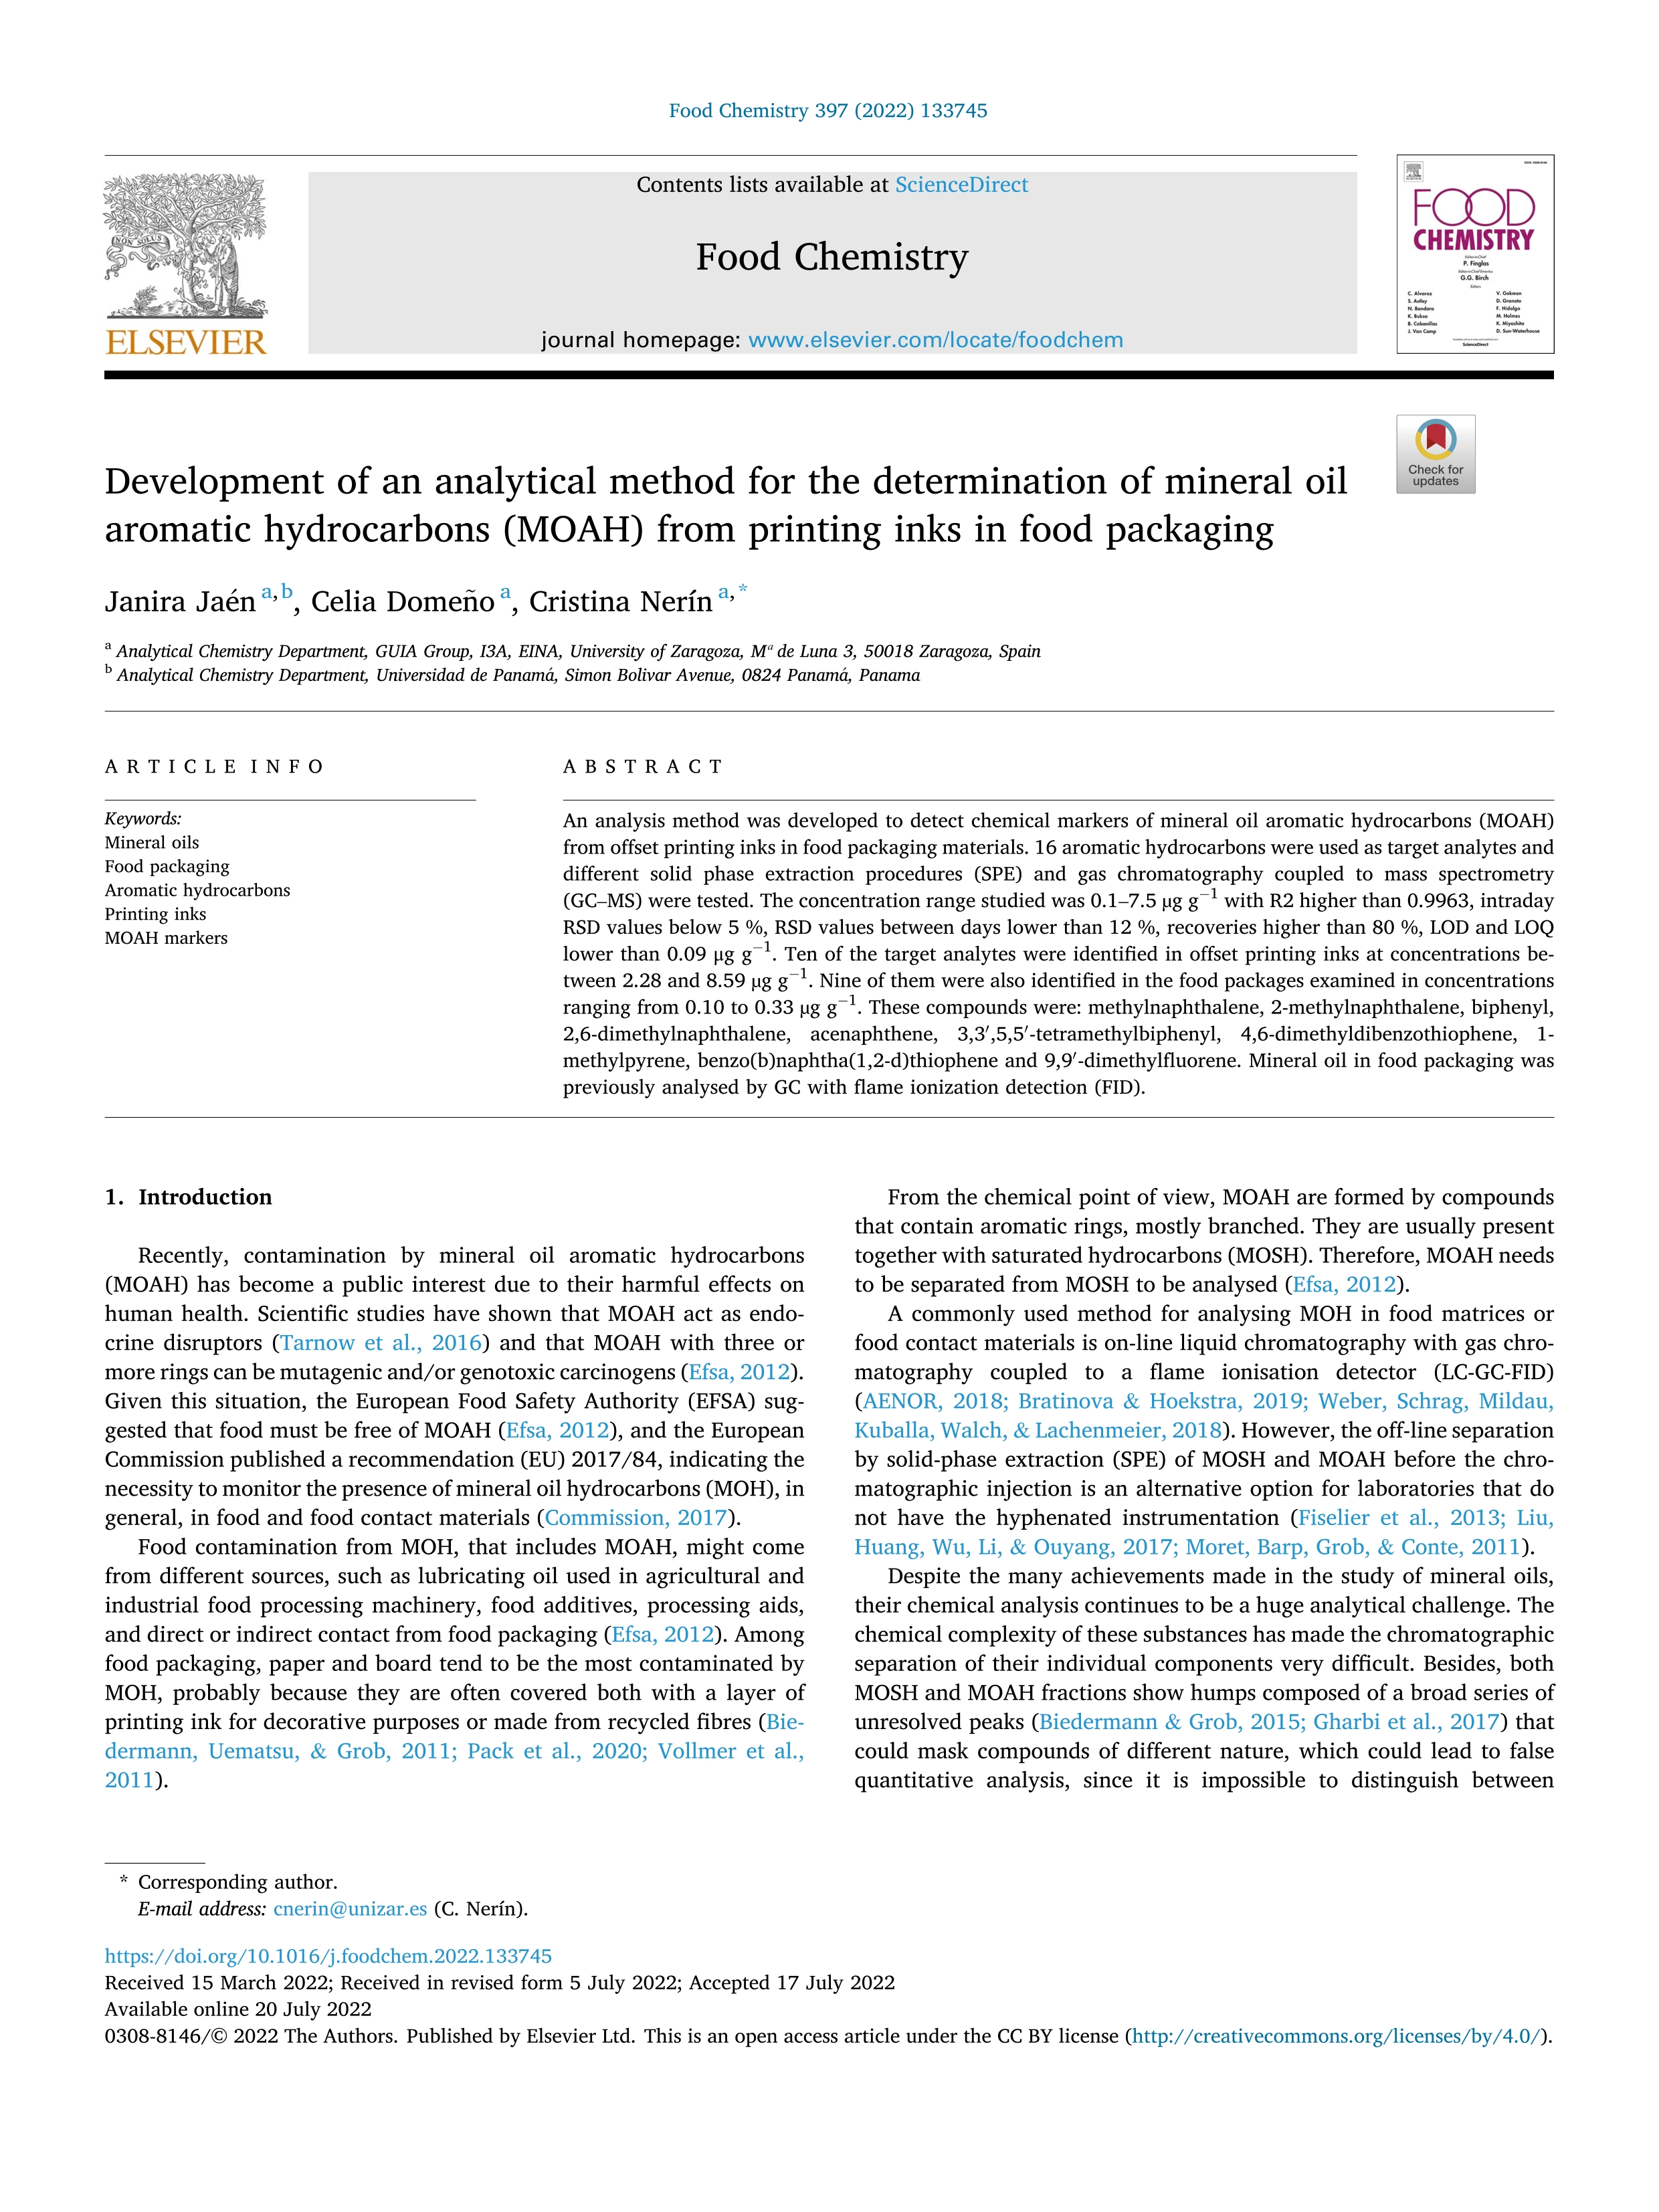 Development of an analytical method for the determination of mineral oil aromatic hydrocarbons (MOAH) from printing inks in food packaging